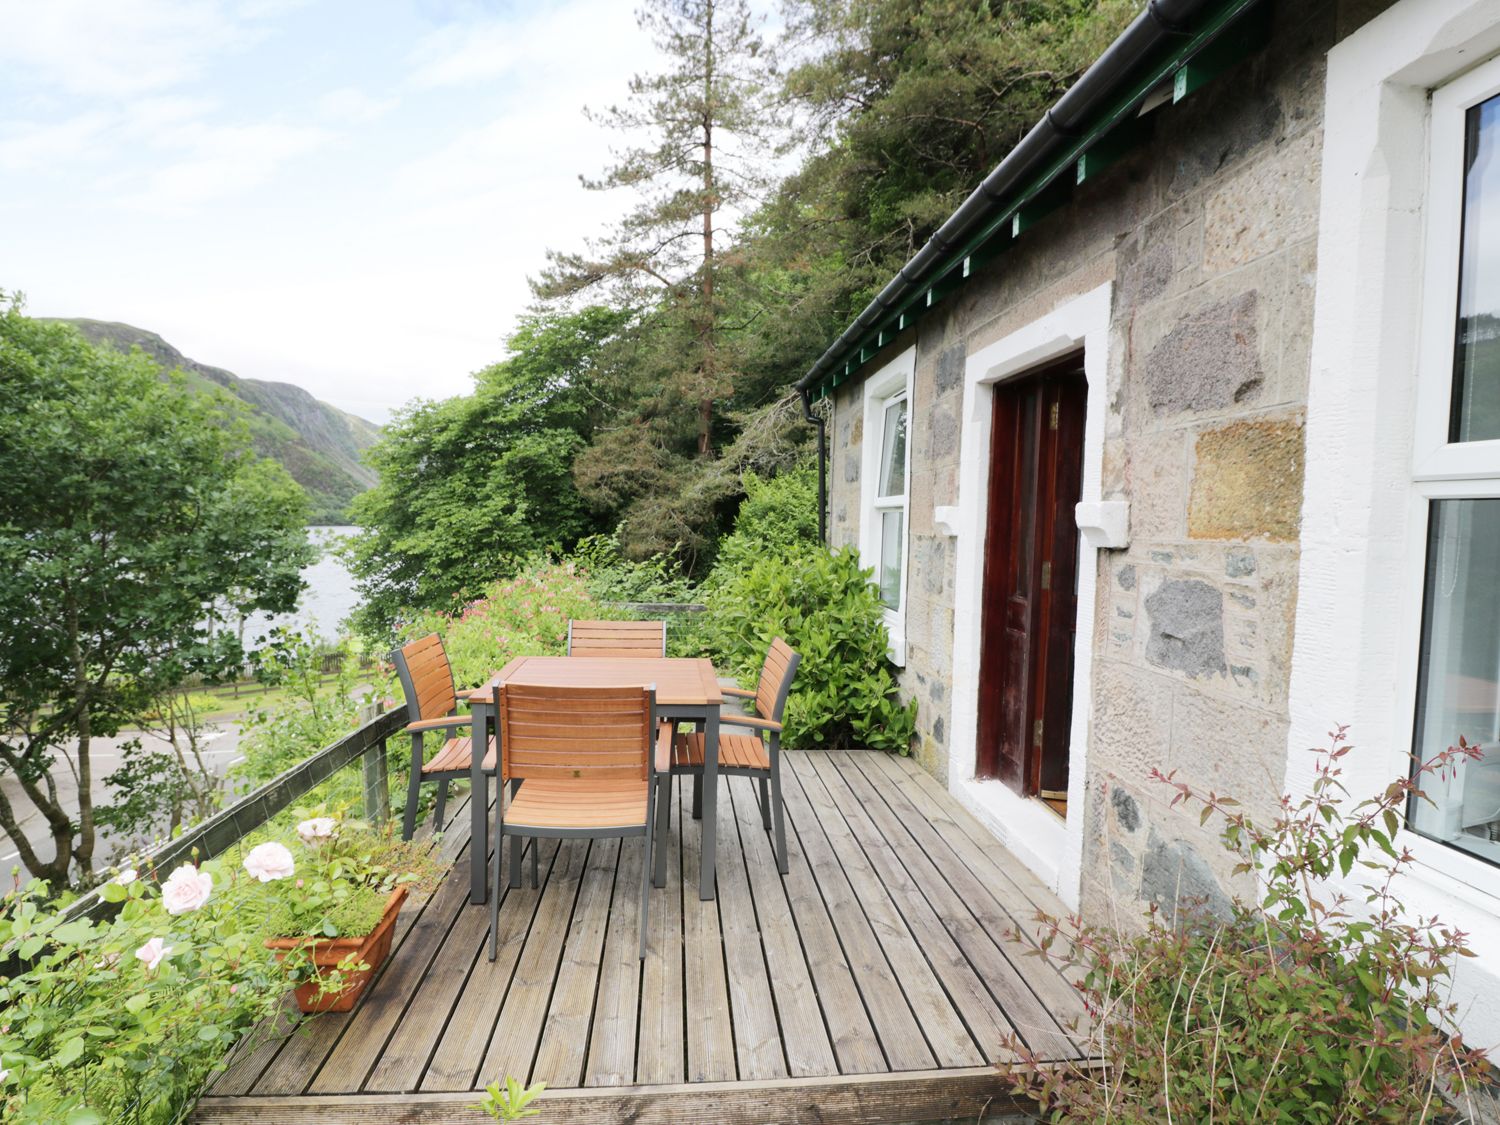 Awe View Railway Cottage, Argyll and Bute